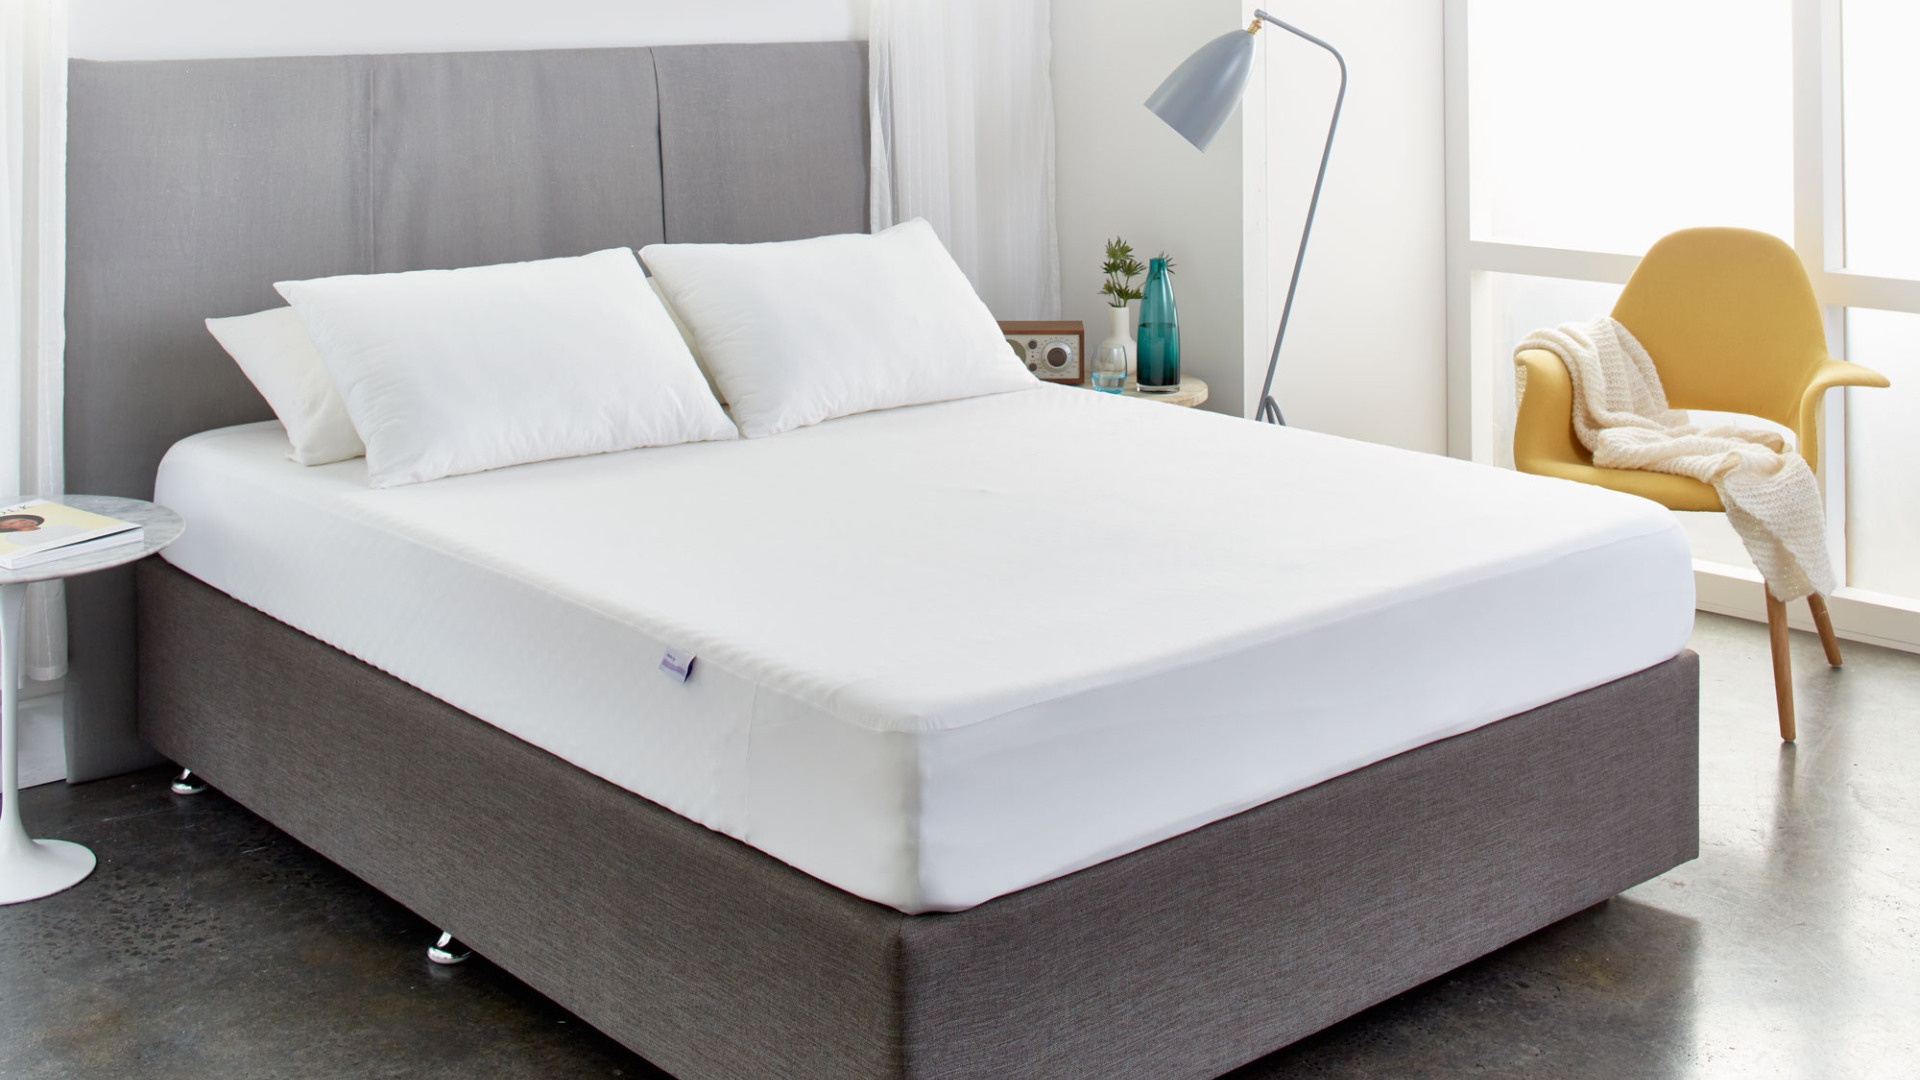 protect-a-bed health-ensure cool mattress